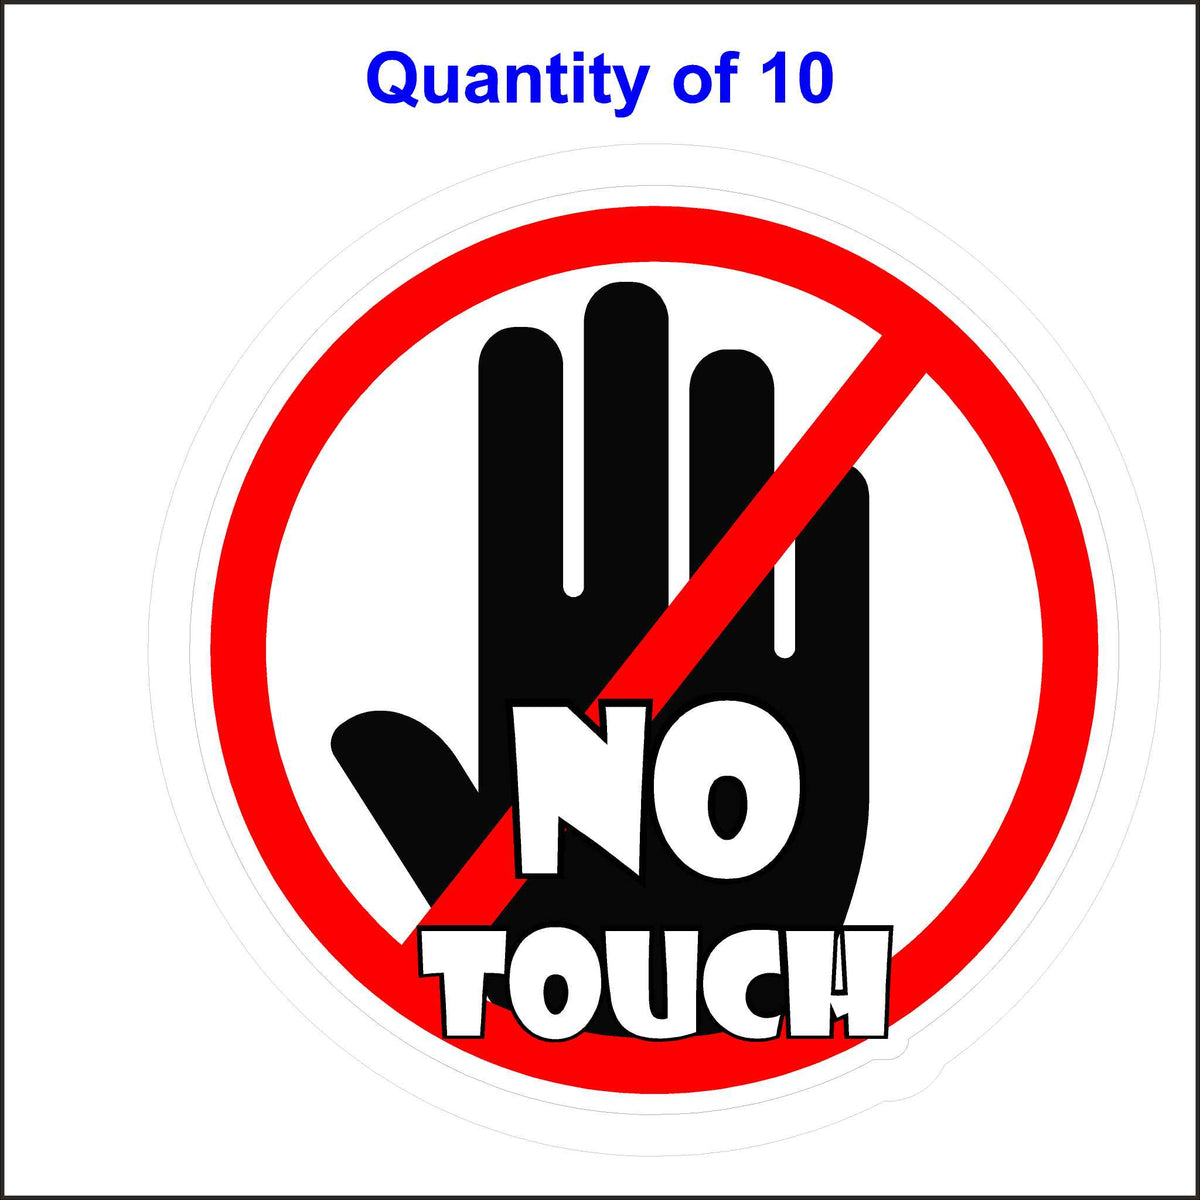 STOP No Touch Sticker. 10 Quantity.